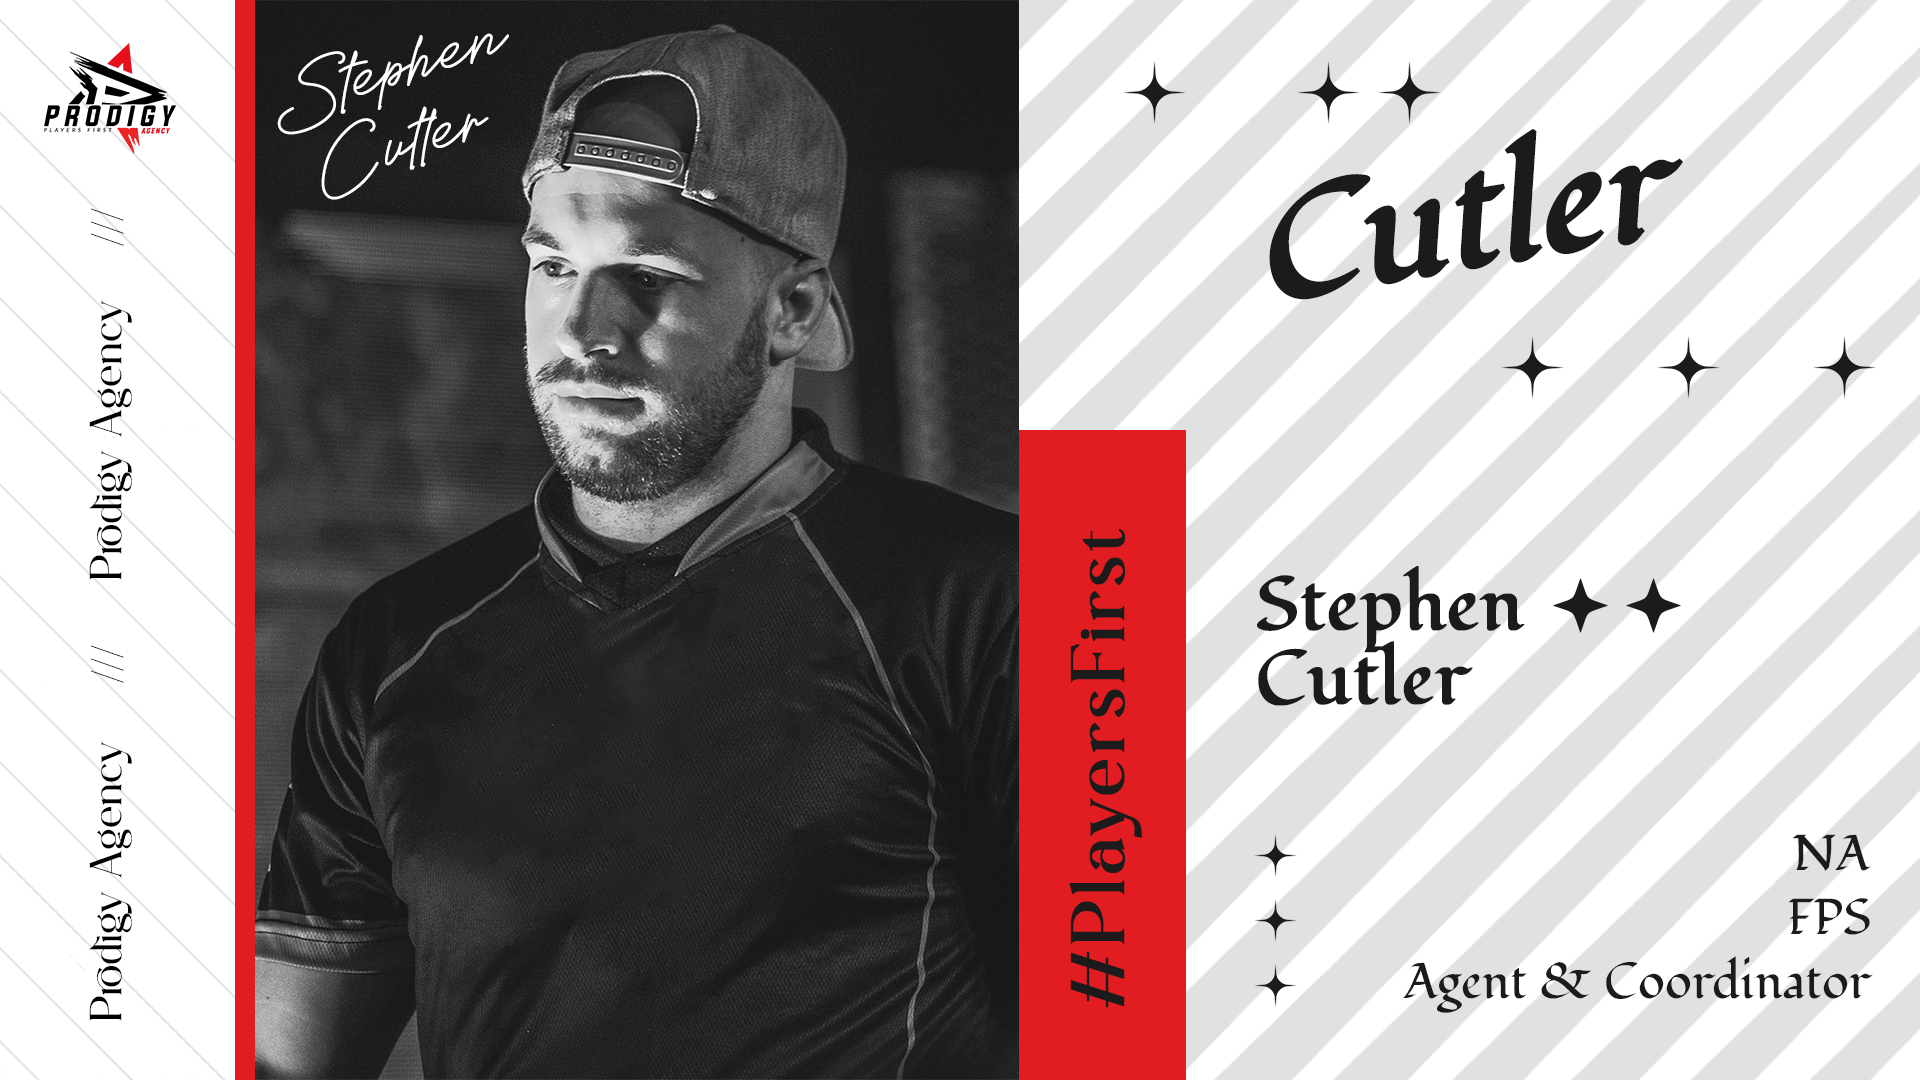 Stephen Cutler joins Prodigy Agency as NA FPS agent